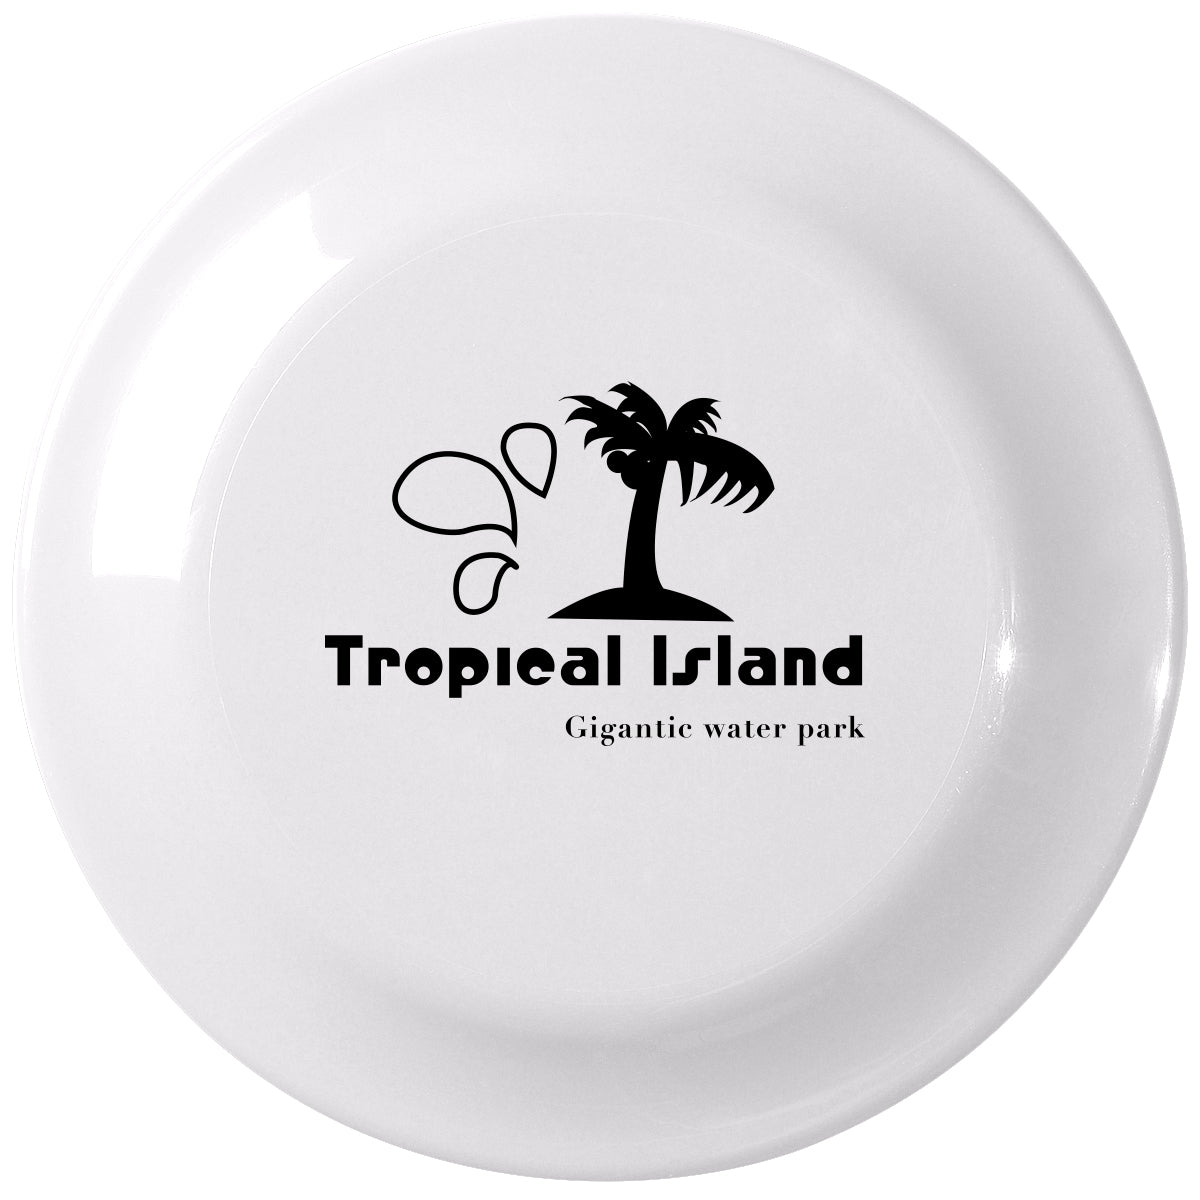 100 Frisbees with your message